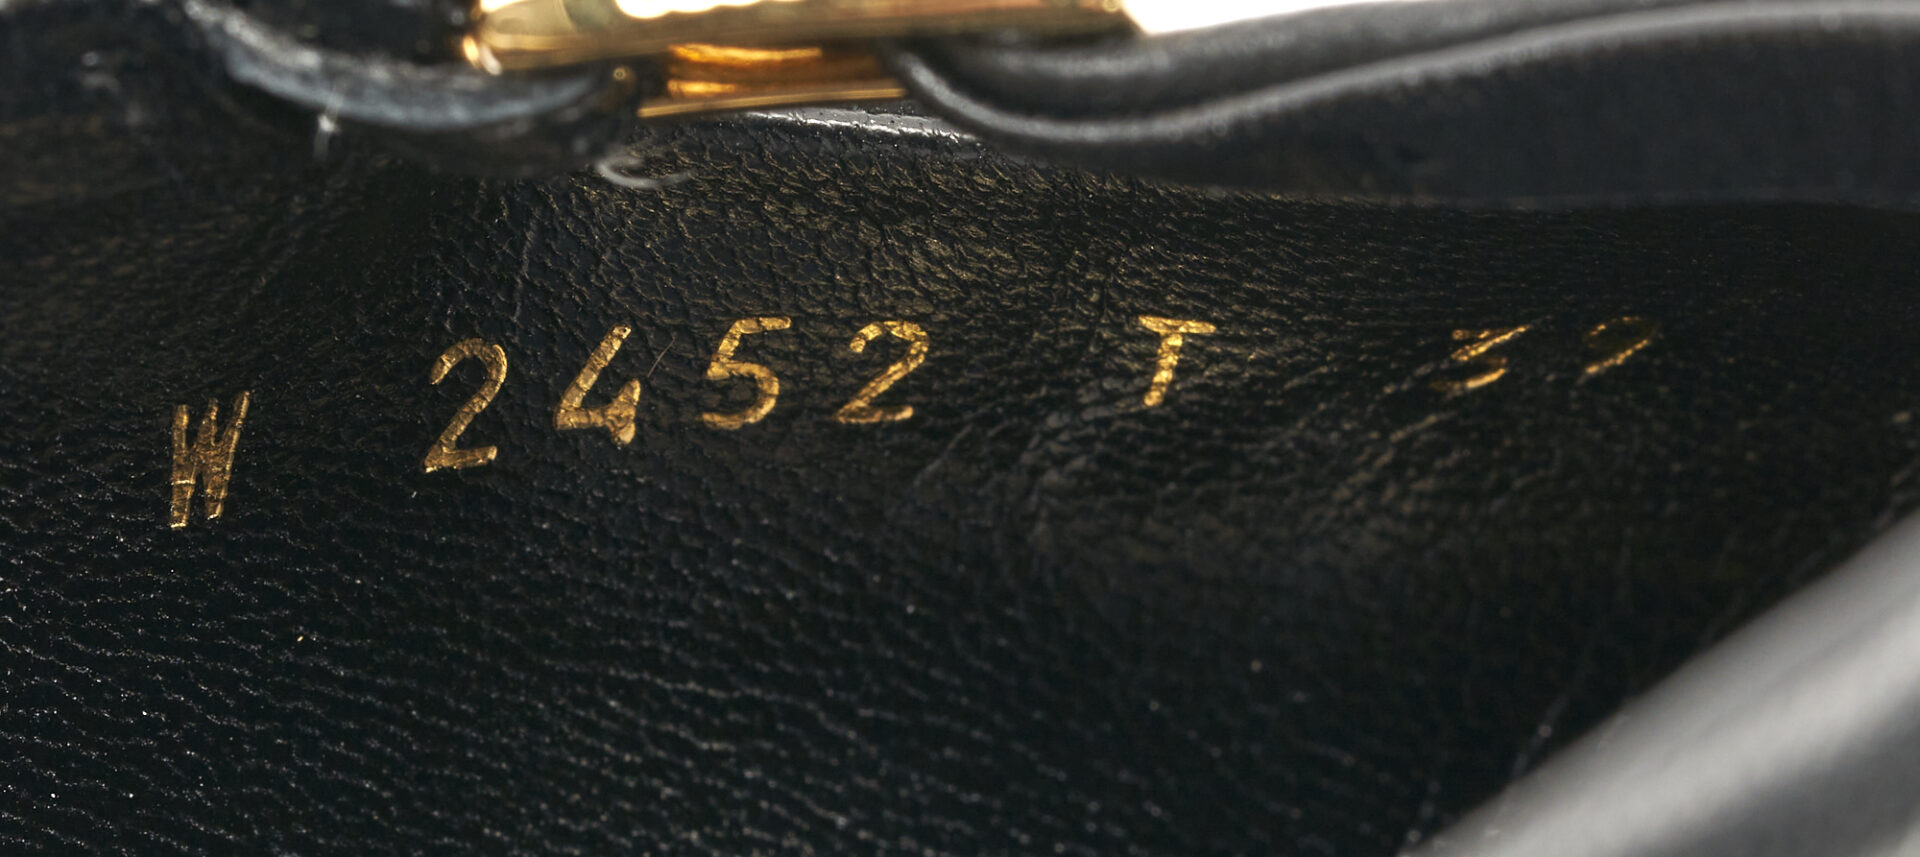 Lot 146: 3 prs. Tom Ford Pumps, incl. Mary Jane Mules